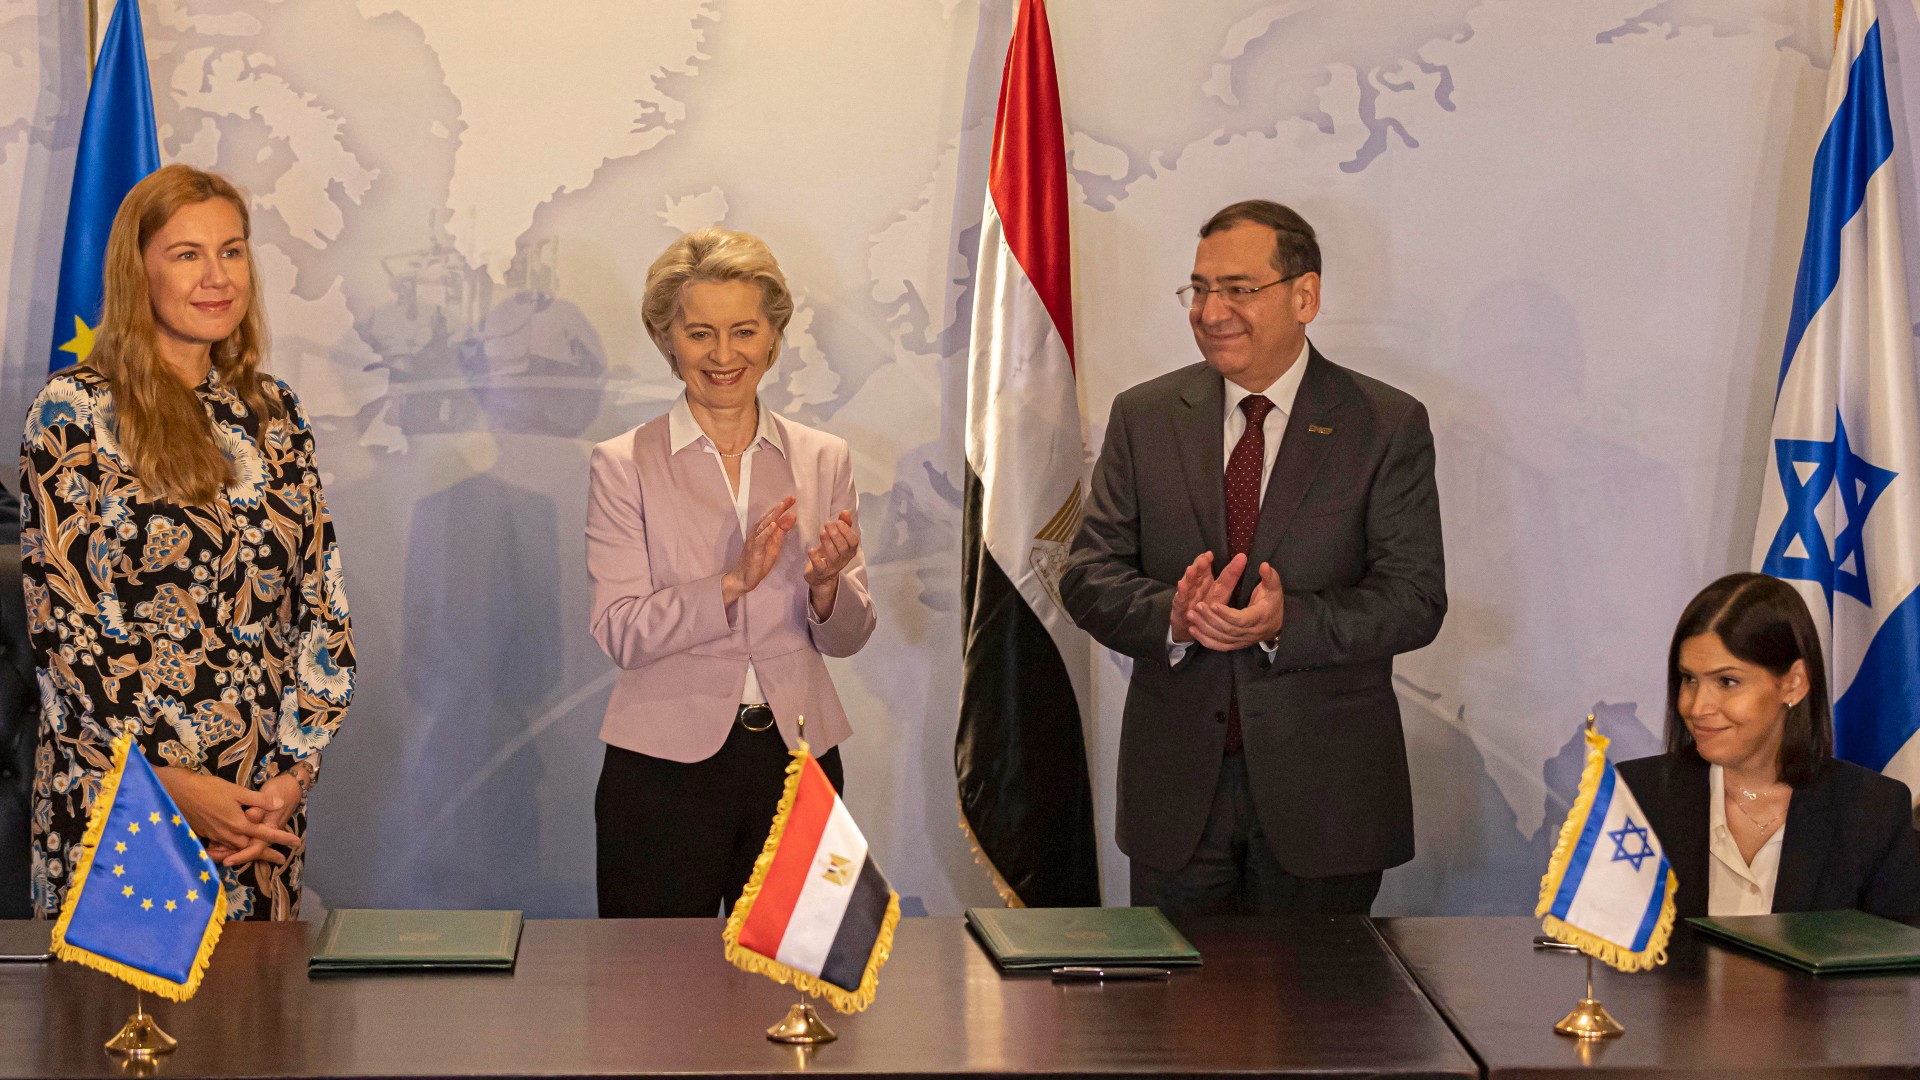 Representatives from the EU, Egypt and Israel sign a trilateral natural gas deal in Cairo on 15 June 2022 (AFP)